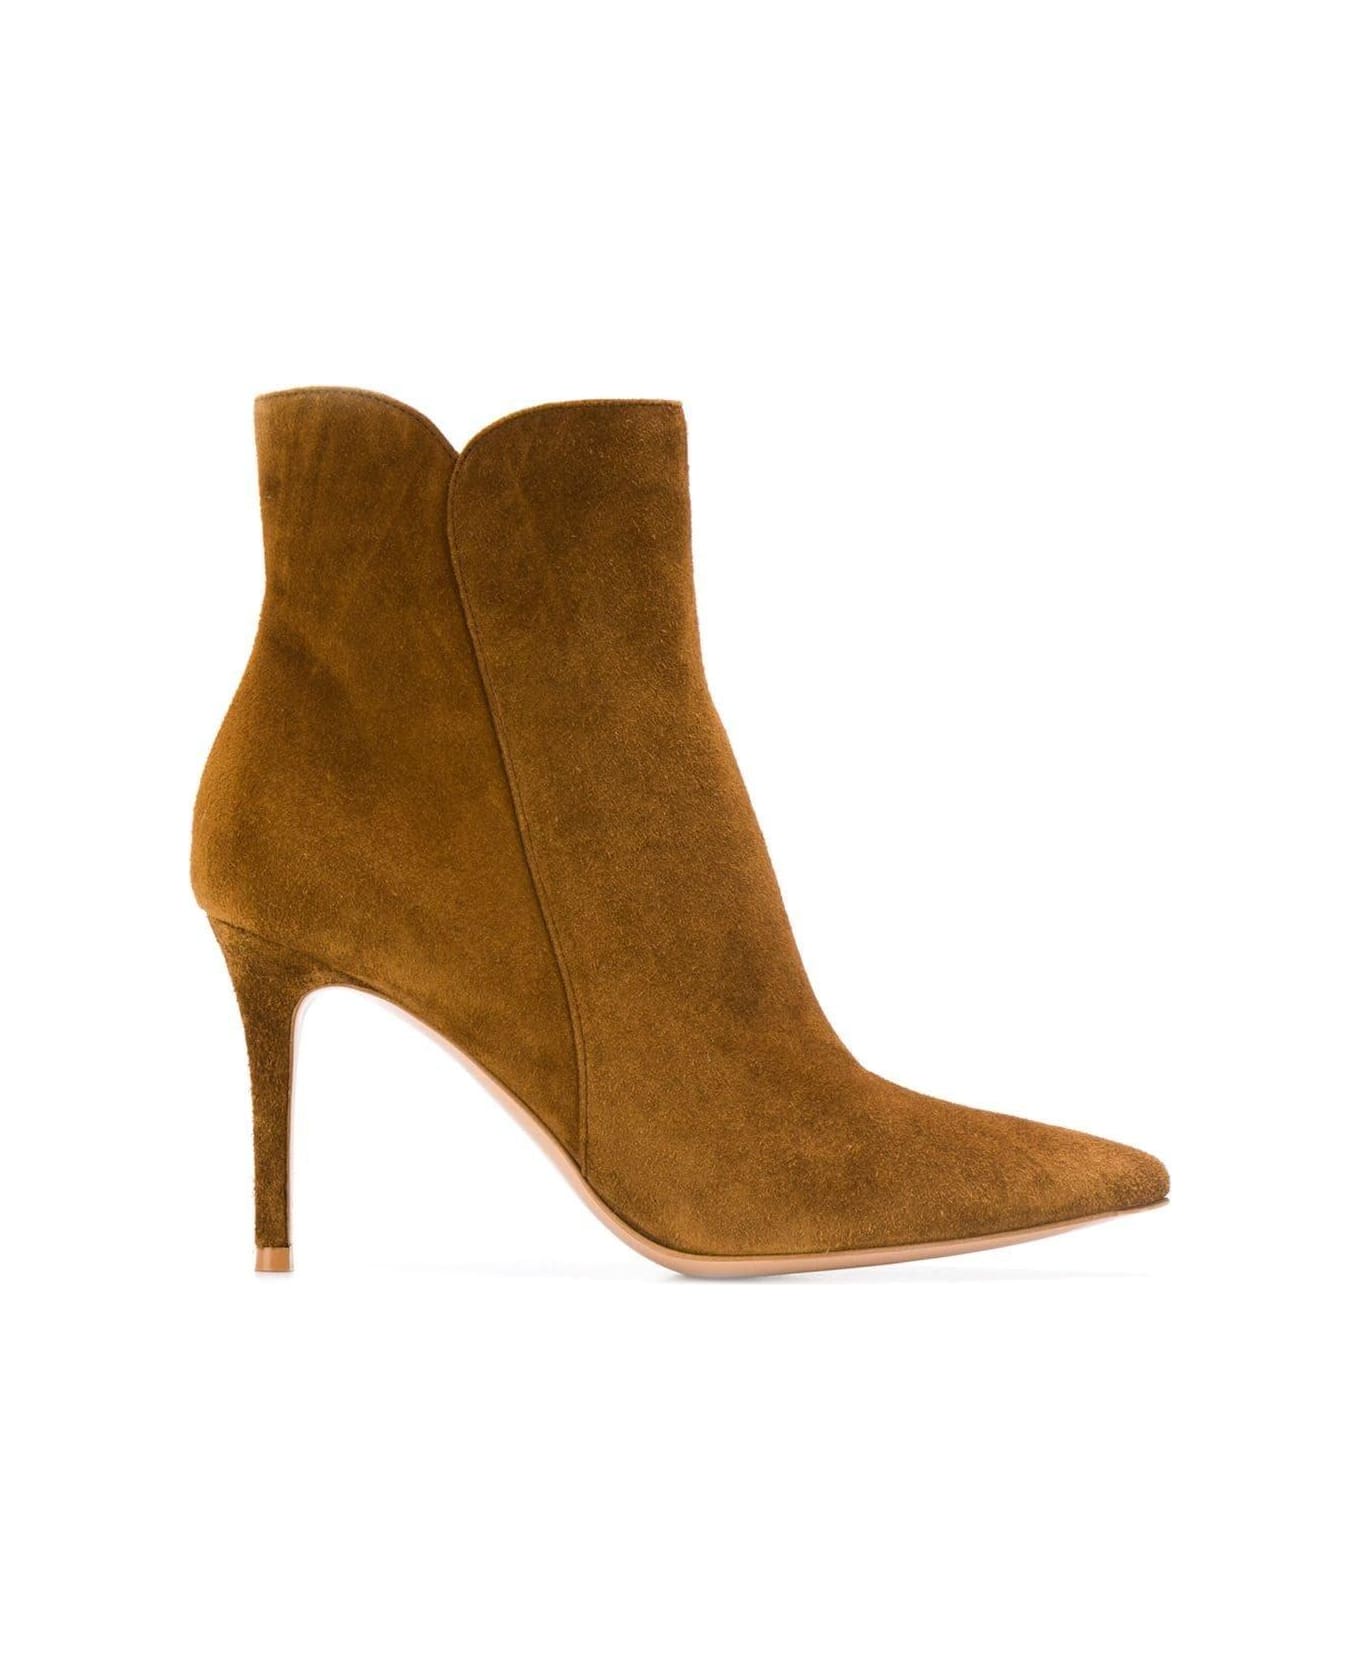 Gianvito Rossi Levy Ankle Boots ブーツ